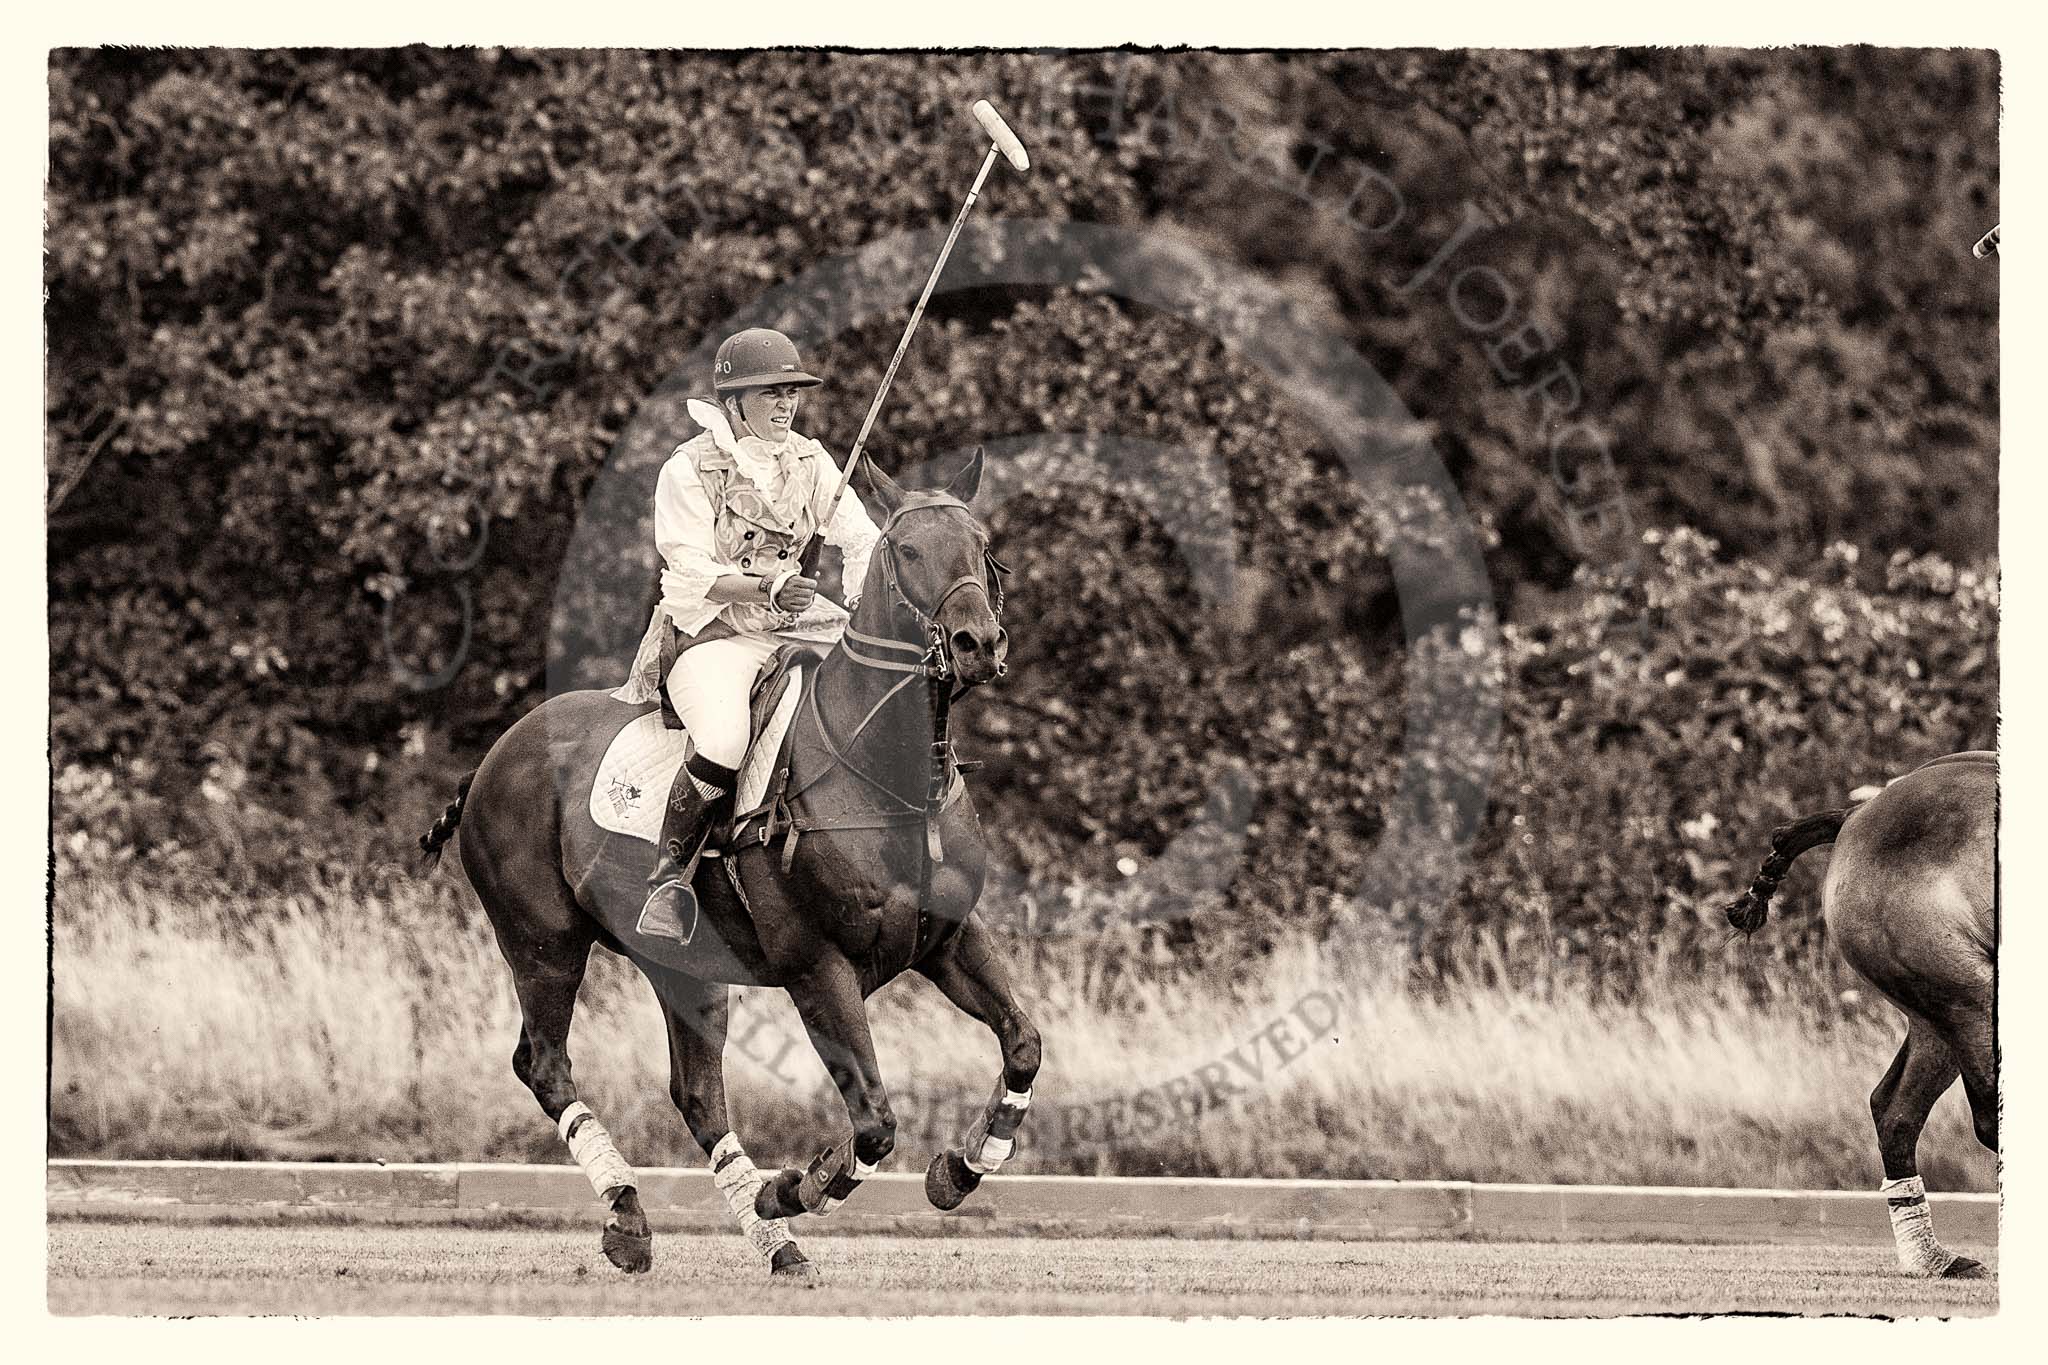 7th Heritage Polo Cup finals: Barbara P Zingg..
Hurtwood Park Polo Club,
Ewhurst Green,
Surrey,
United Kingdom,
on 05 August 2012 at 15:16, image #144